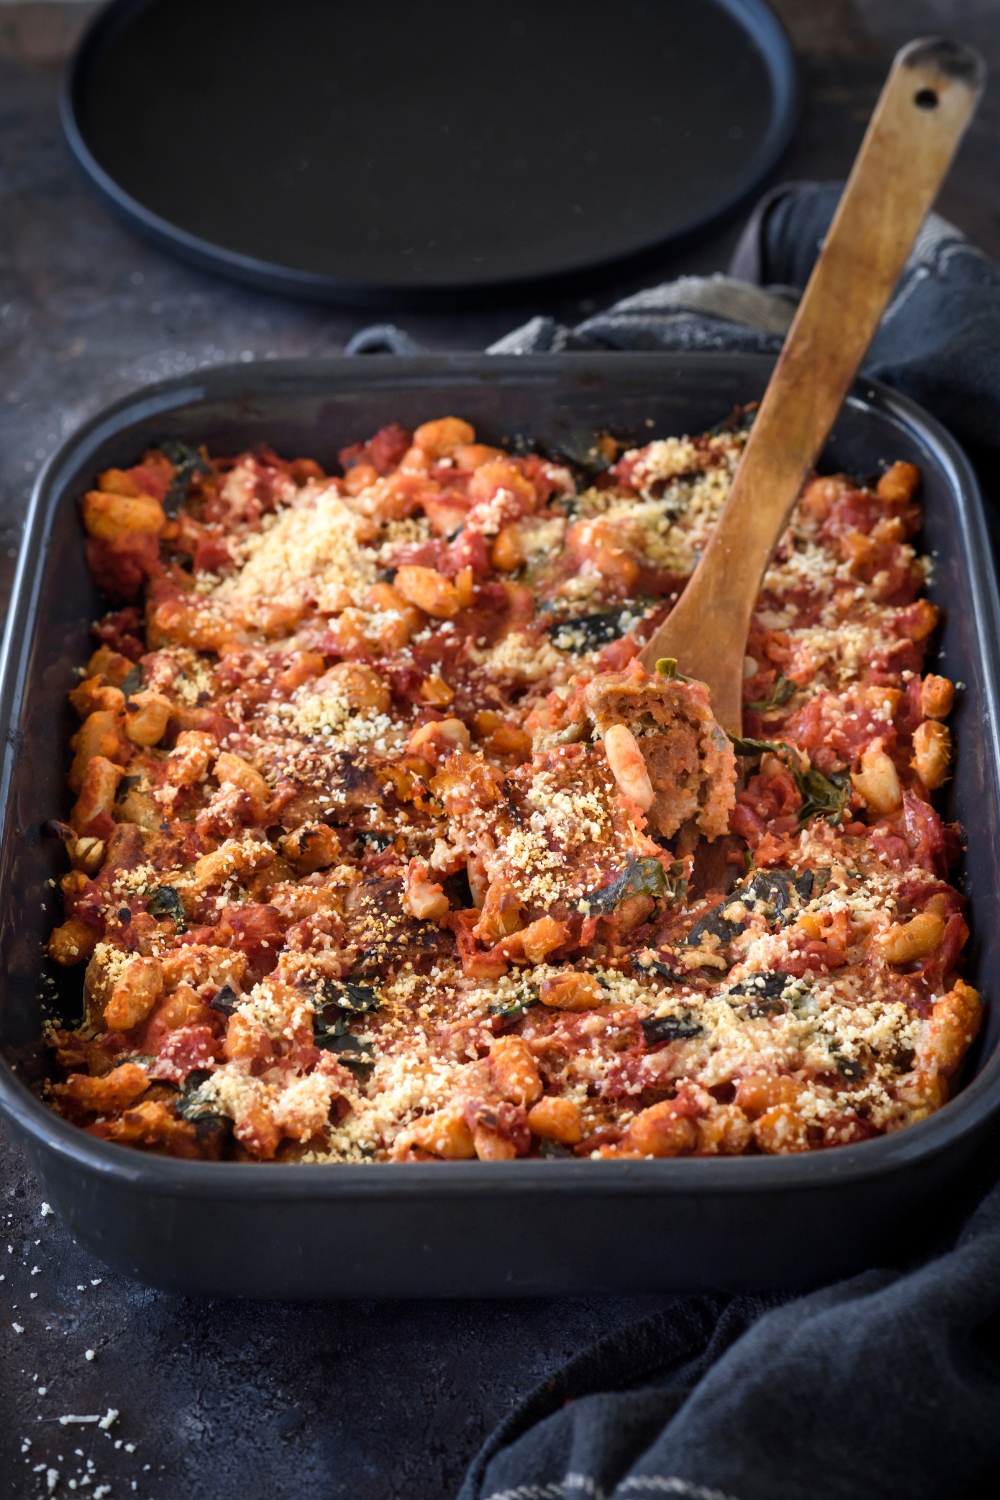 A baking dish filled with tomato casserole covered in parmesan cheese with a wood spoon sticking out of the baking dish.